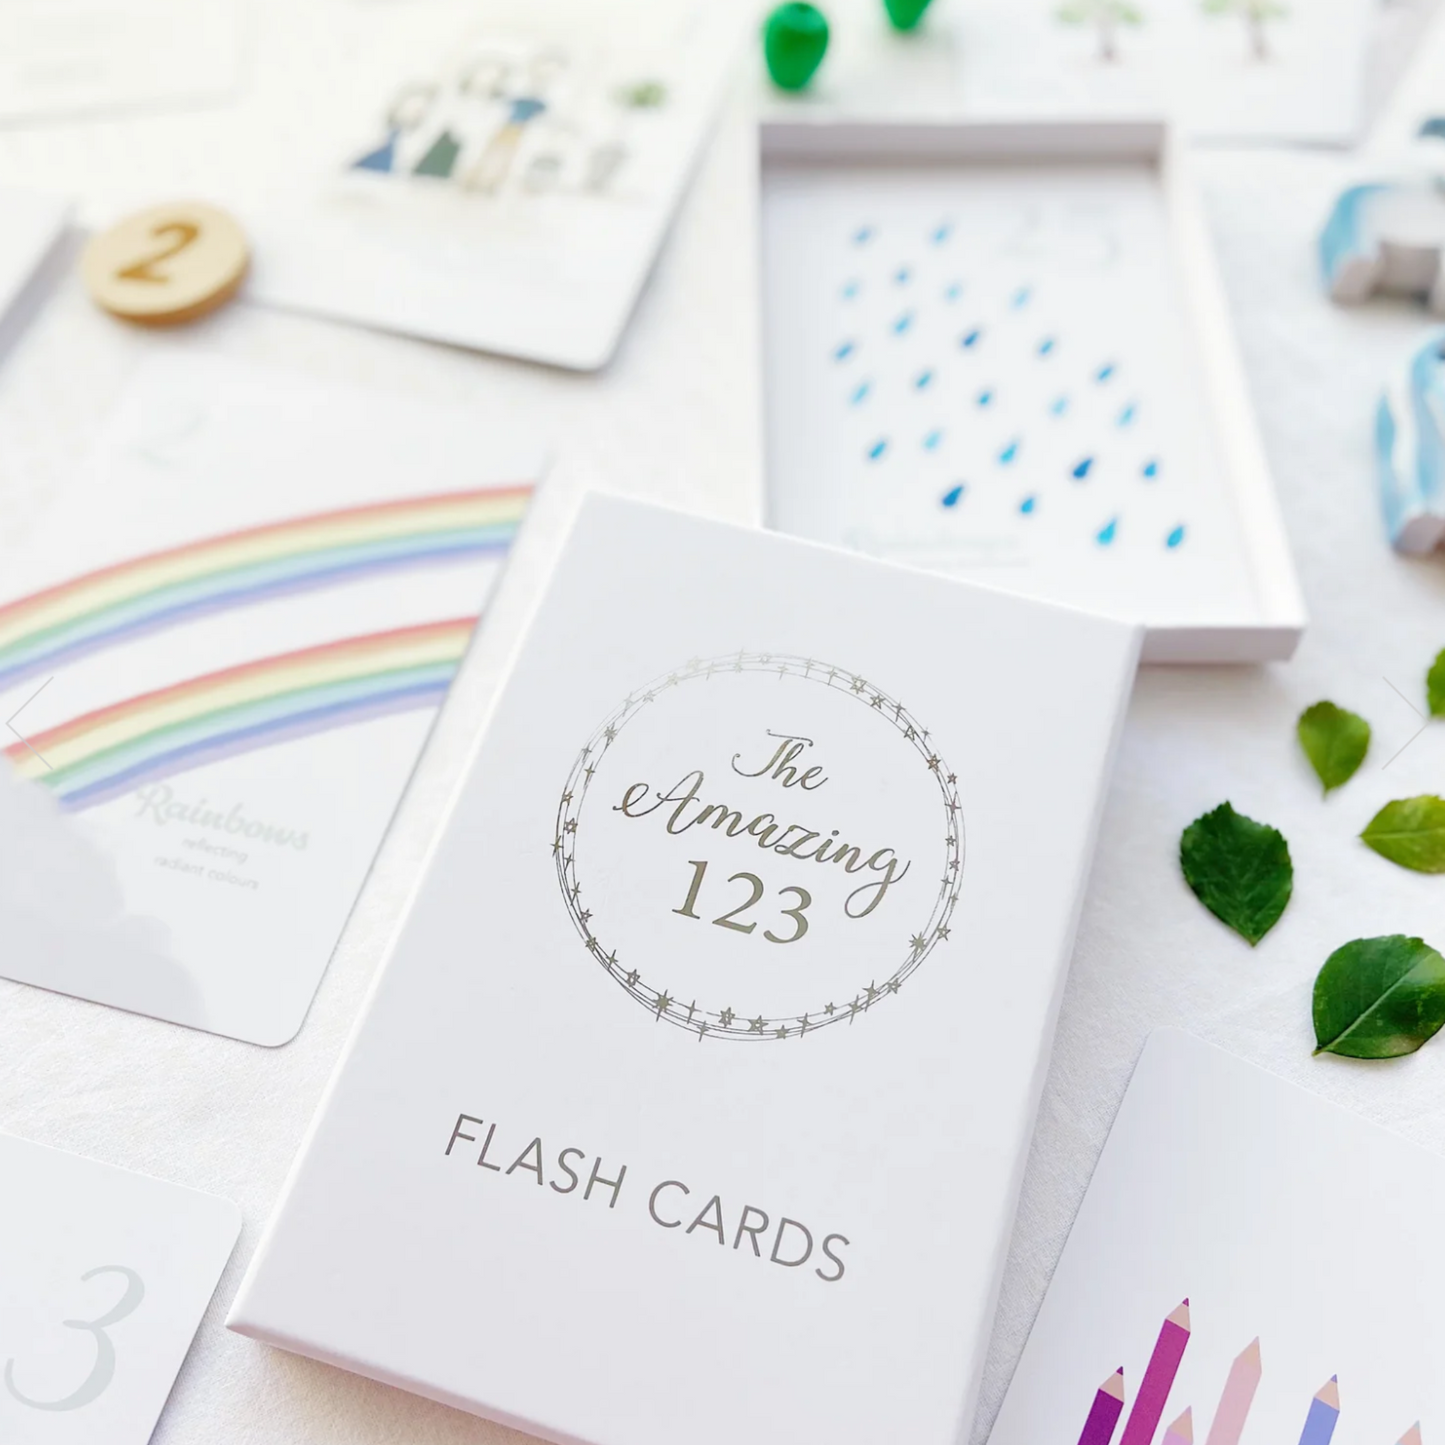 ADORED ILLUSTRATIONS - The Amazing 123 Flash Cards